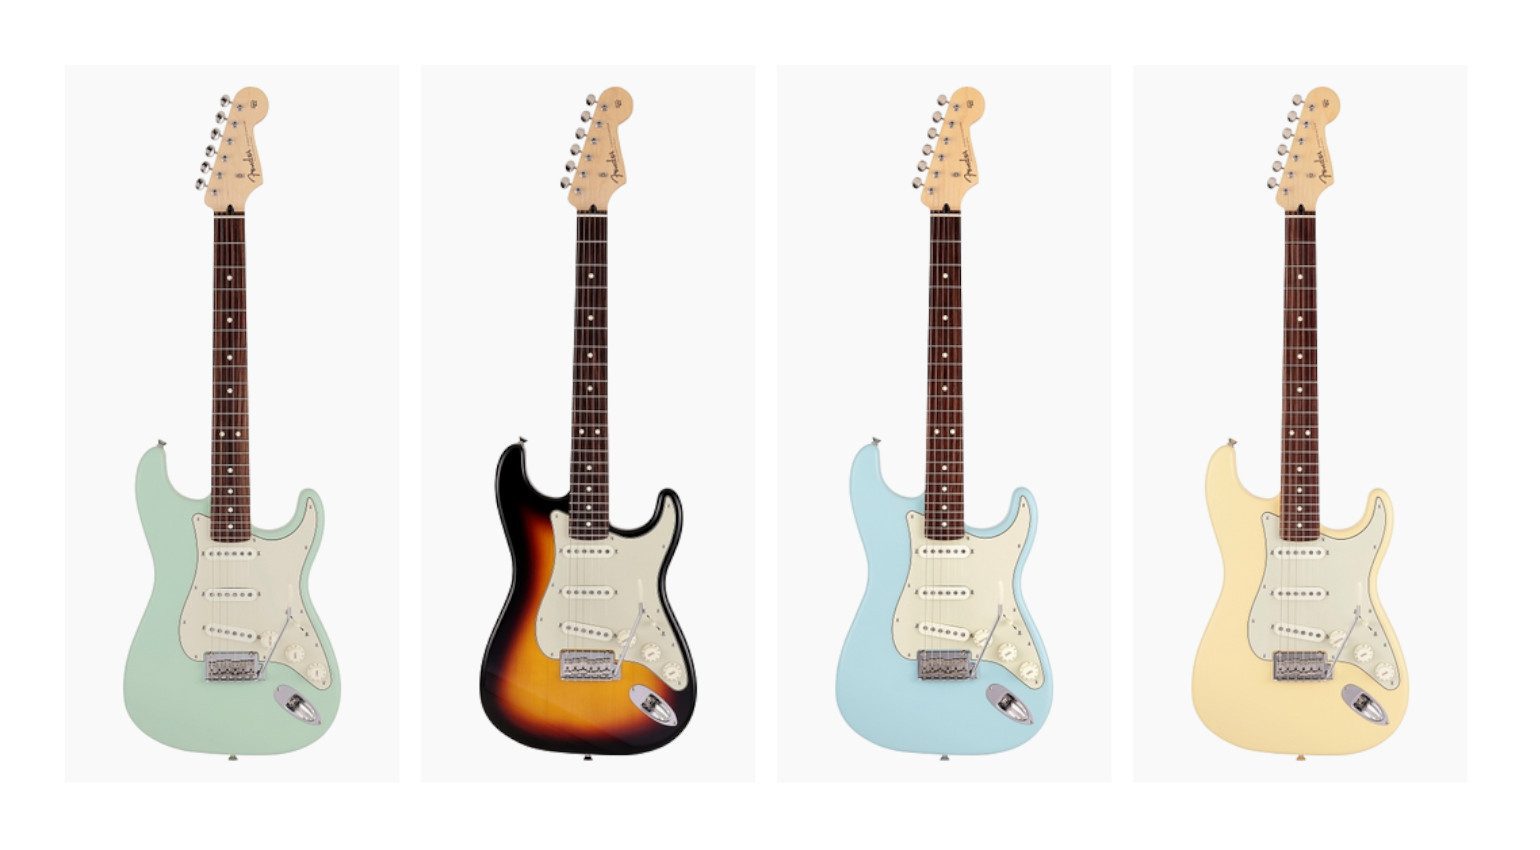 Fender Japan Junior Collection: Shorter scale and satin finishes